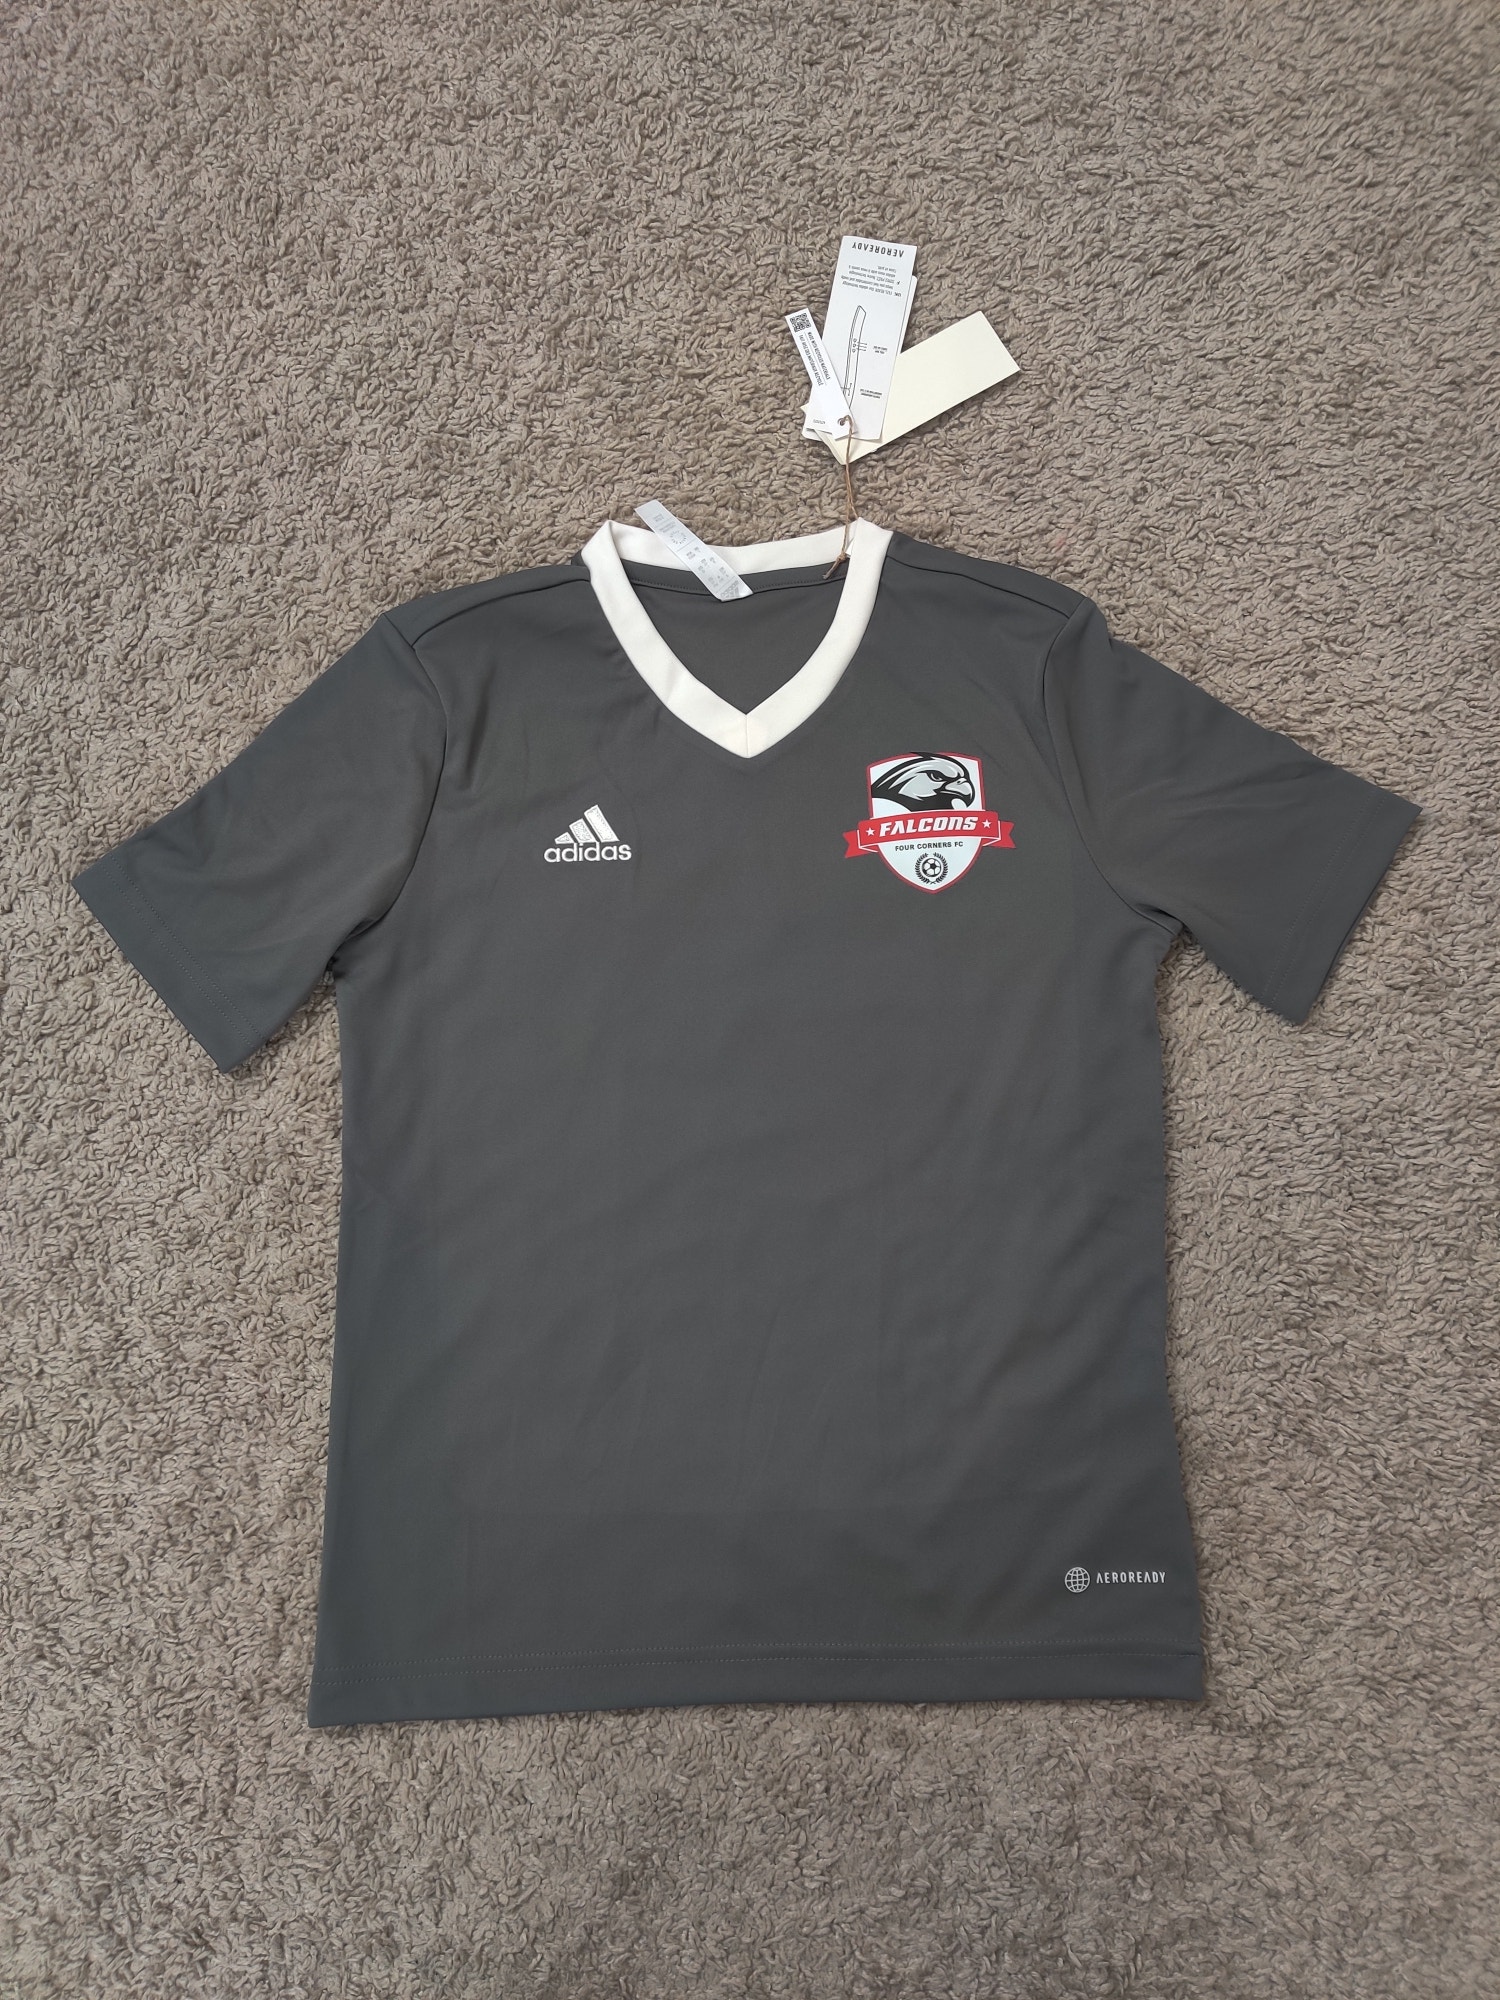 (V) NEW Adidas Youth Falcons Four Cornes FC #40 shirt soccer jersey sz M - Picture 2 of 9